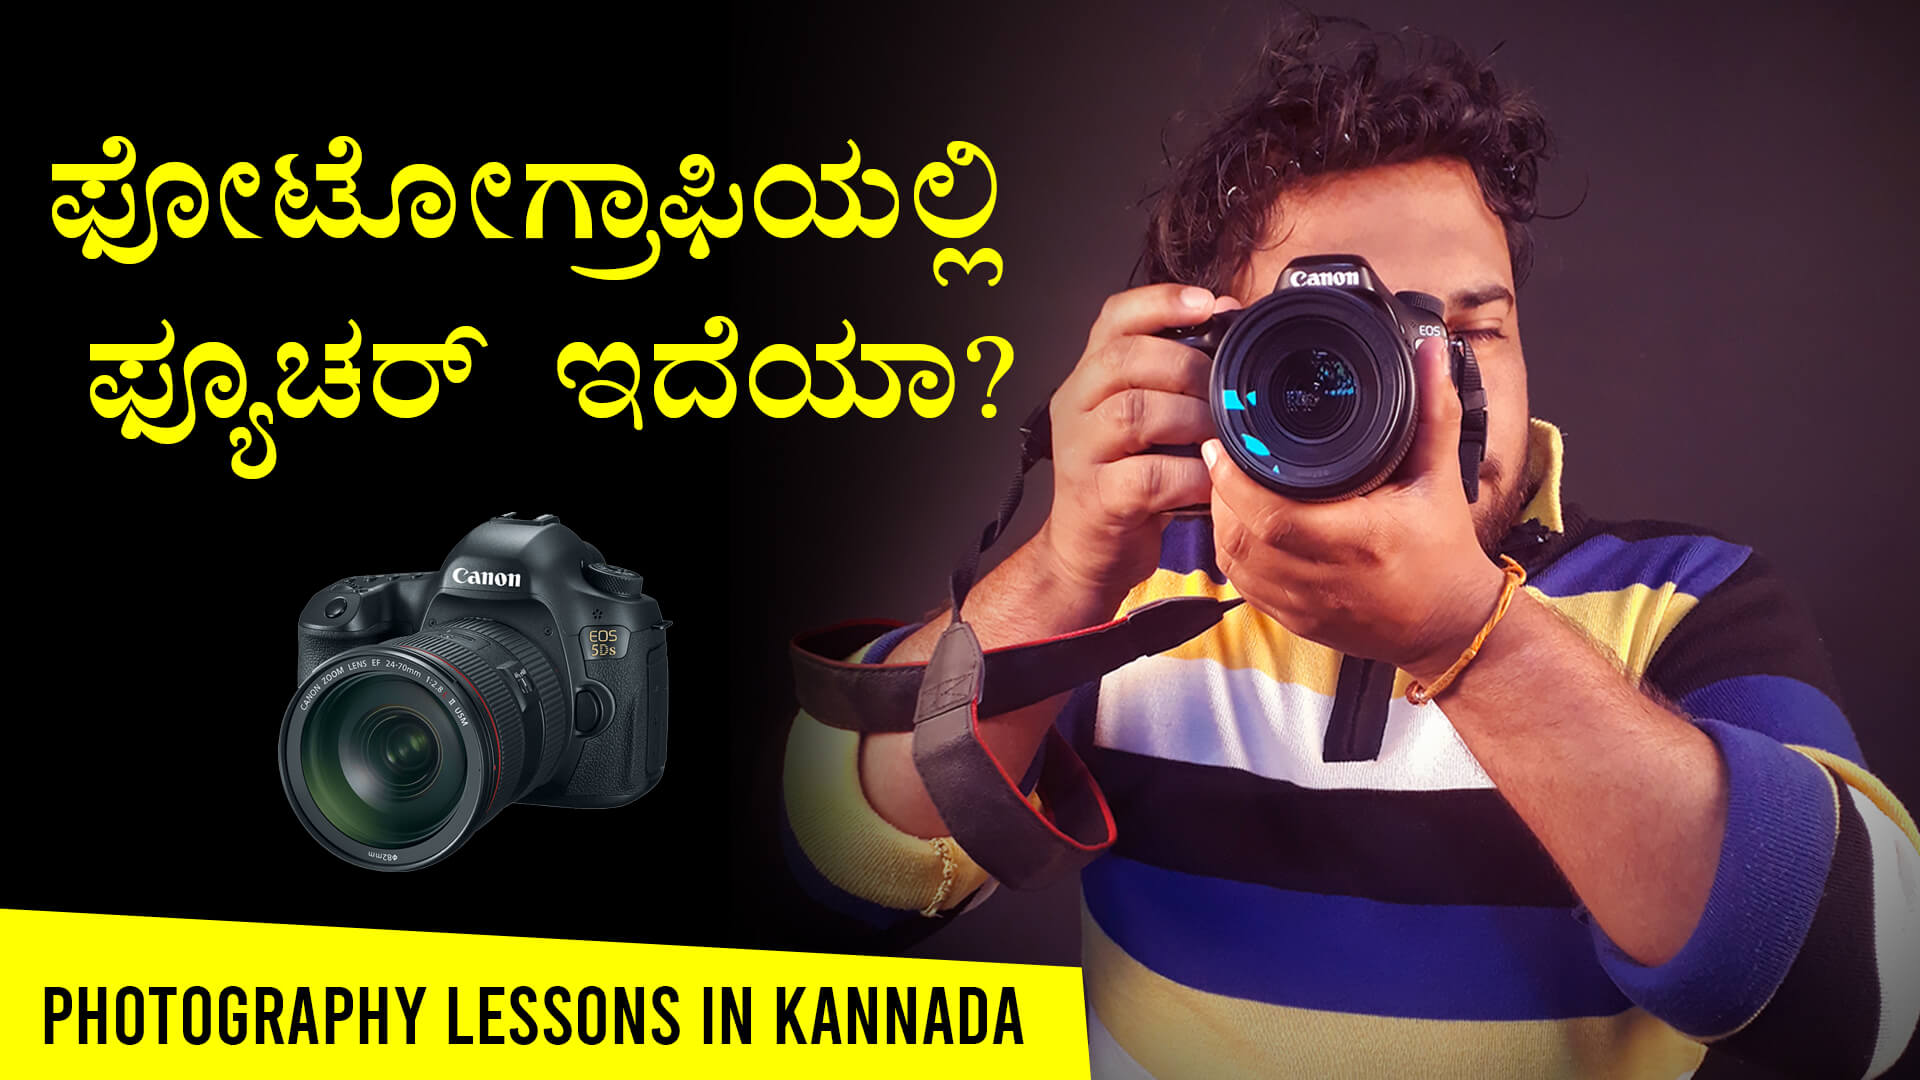 You are currently viewing ಫೋಟೋಗ್ರಾಫಿಯಲ್ಲಿ ಫ್ಯೂಚರ್ ಇದೆಯಾ? – Photography Lessons in Kannada – Photography Course in Kannada